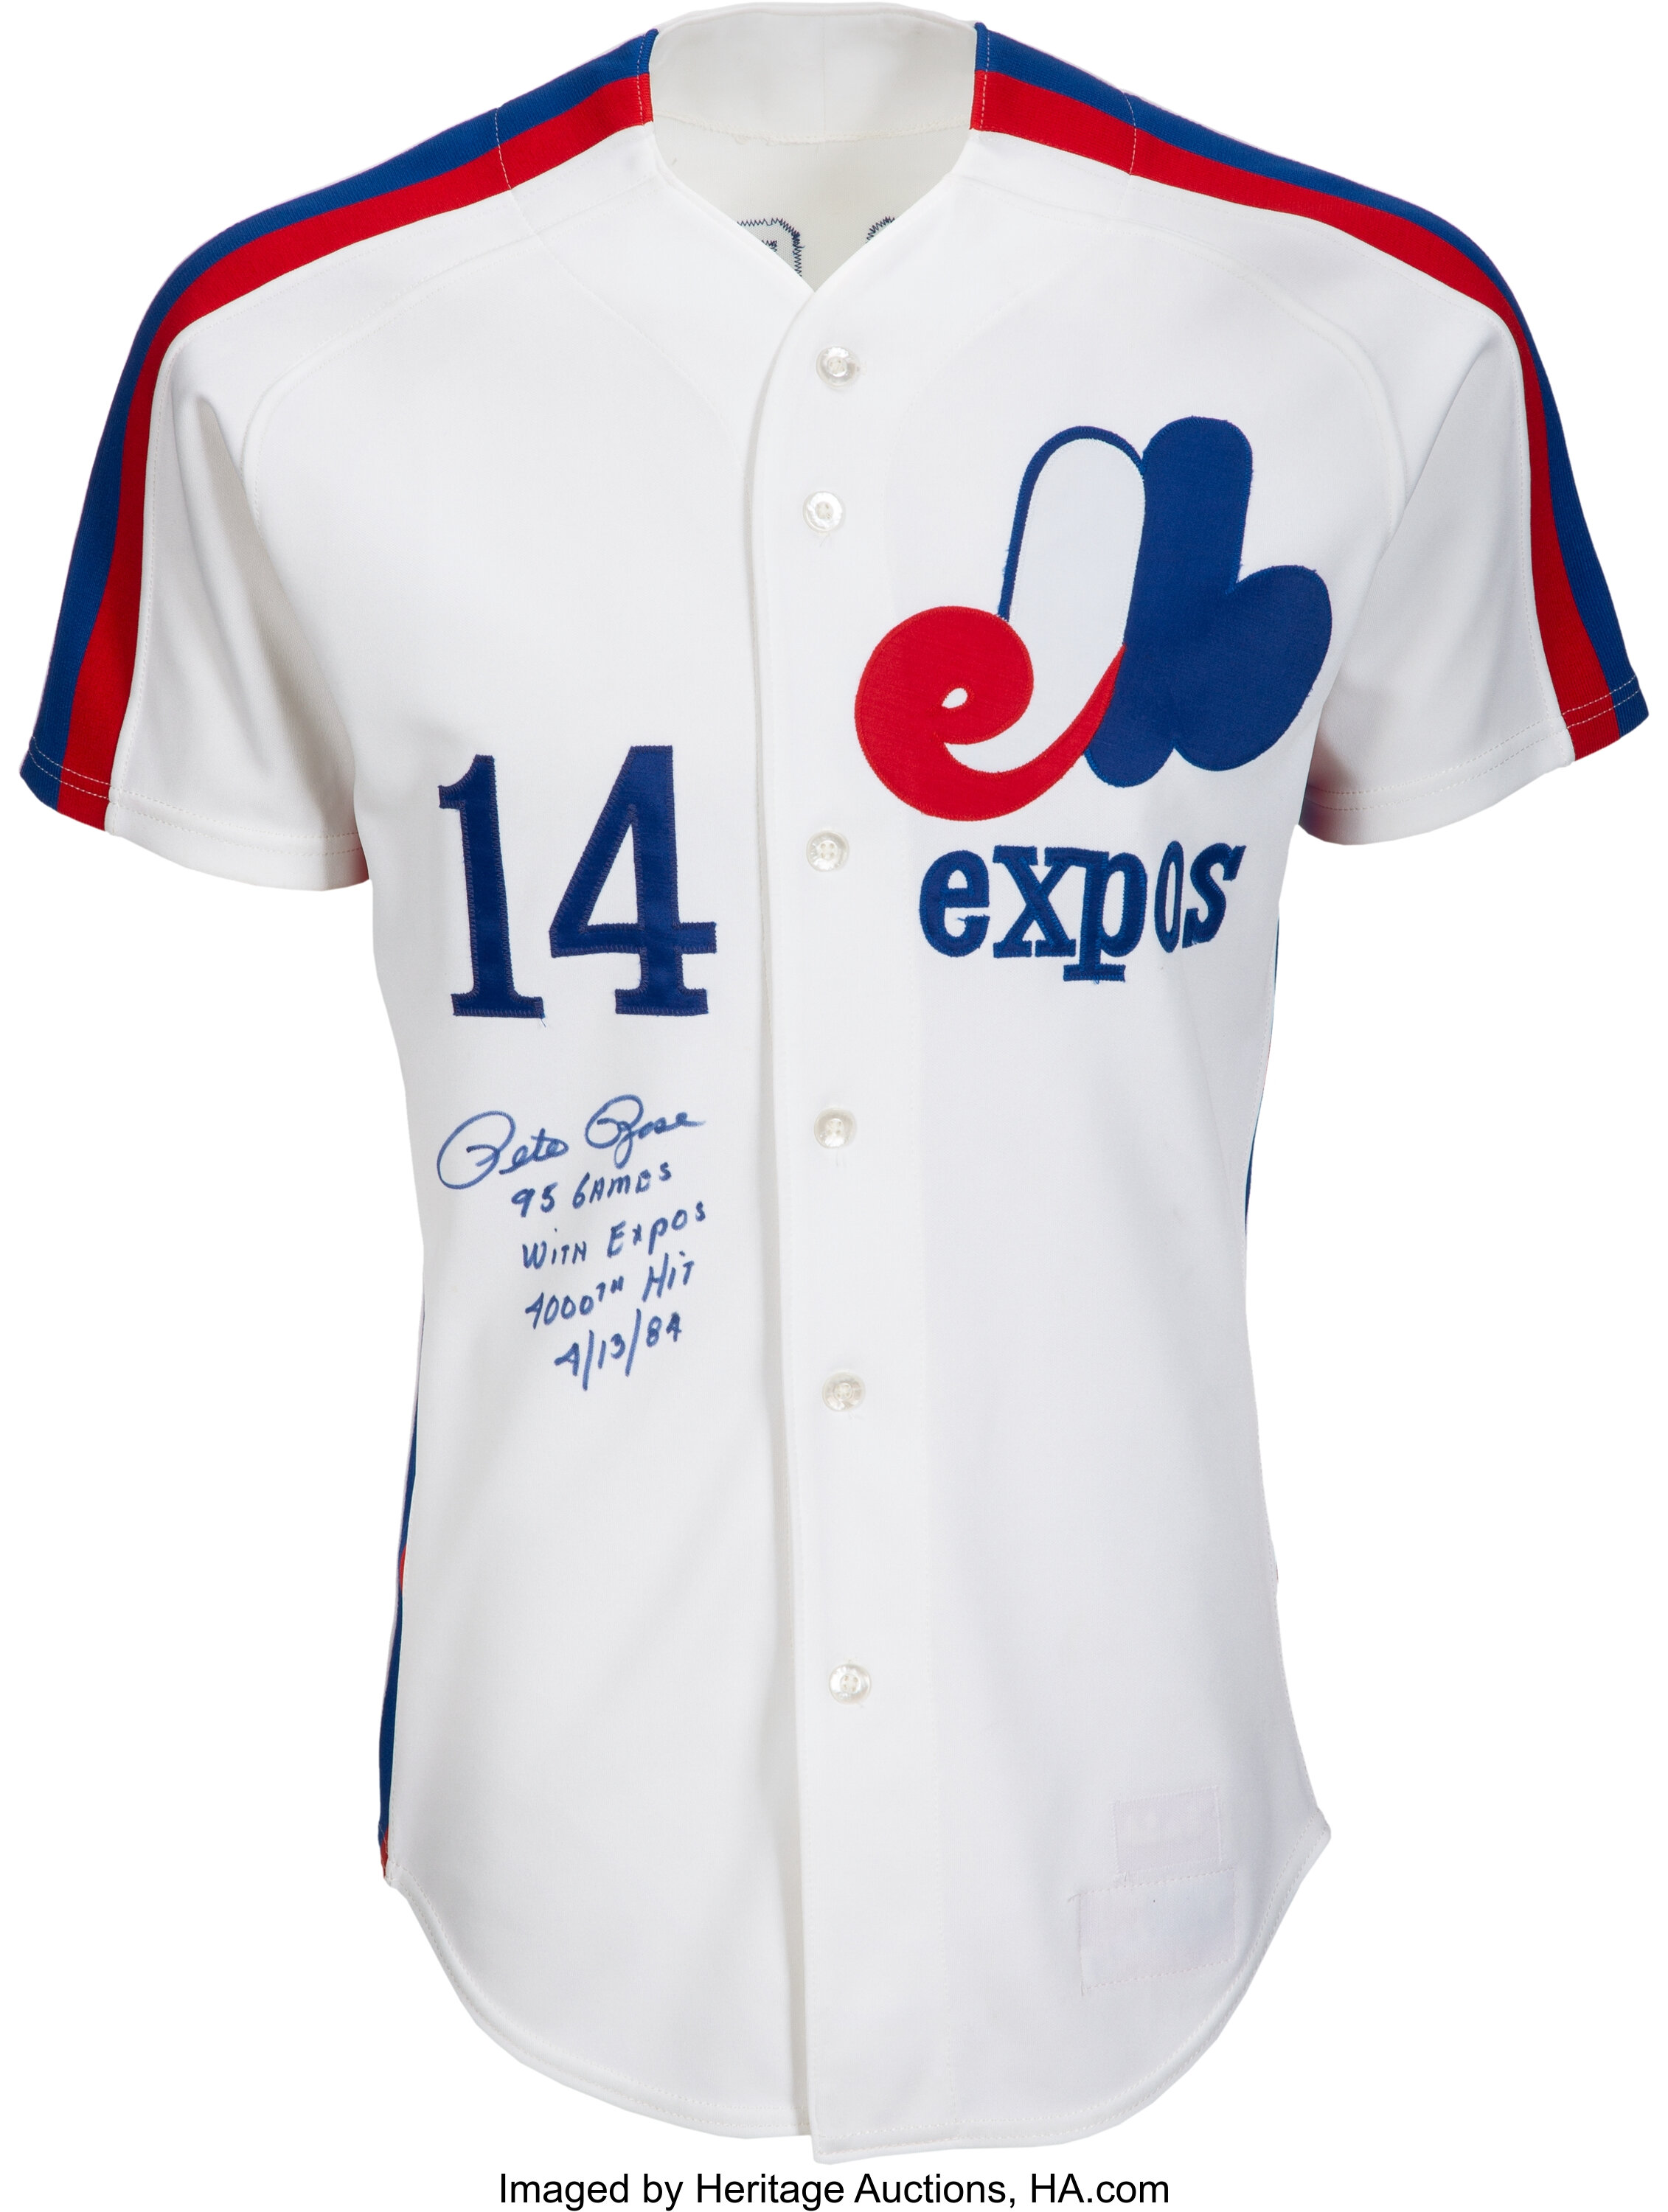 1984 Pete Rose Game Worn & Signed Montreal Expos Jersey.